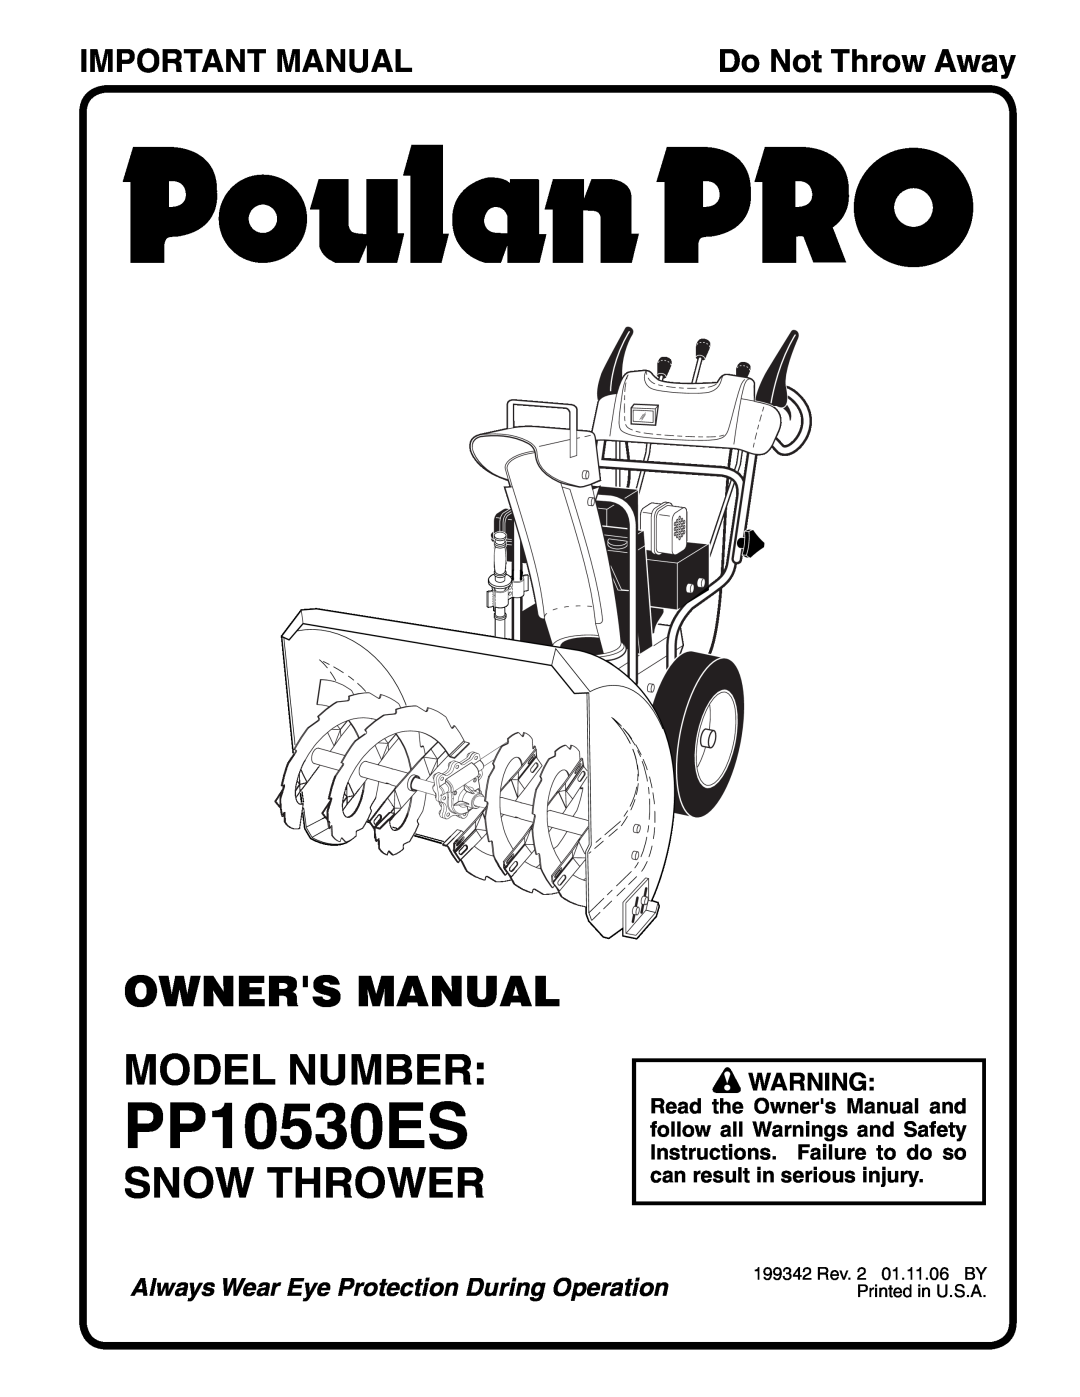 Poulan 199342 owner manual Owners Manual Model Number, Snow Thrower, Important Manual, PP10530ES, Do Not Throw Away 